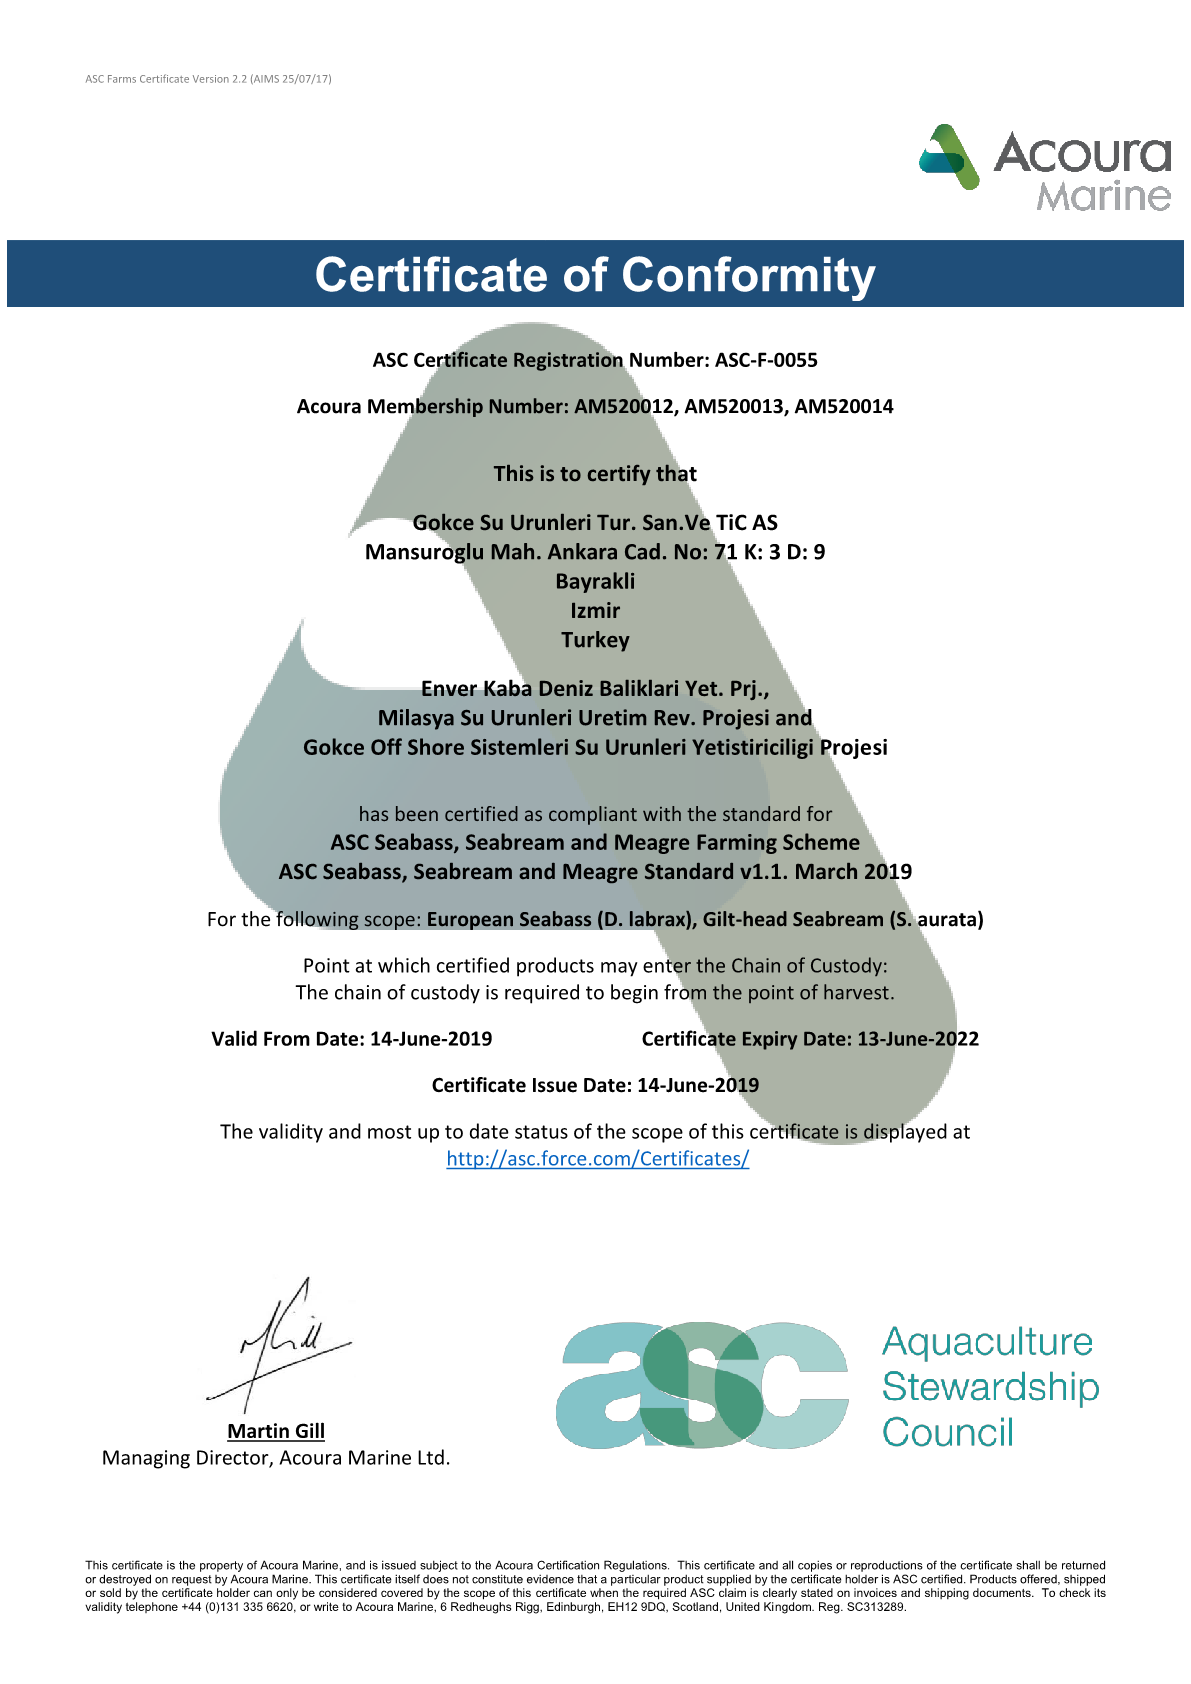 Lucky Fish Co. became one of the first to obtain ASC certificate